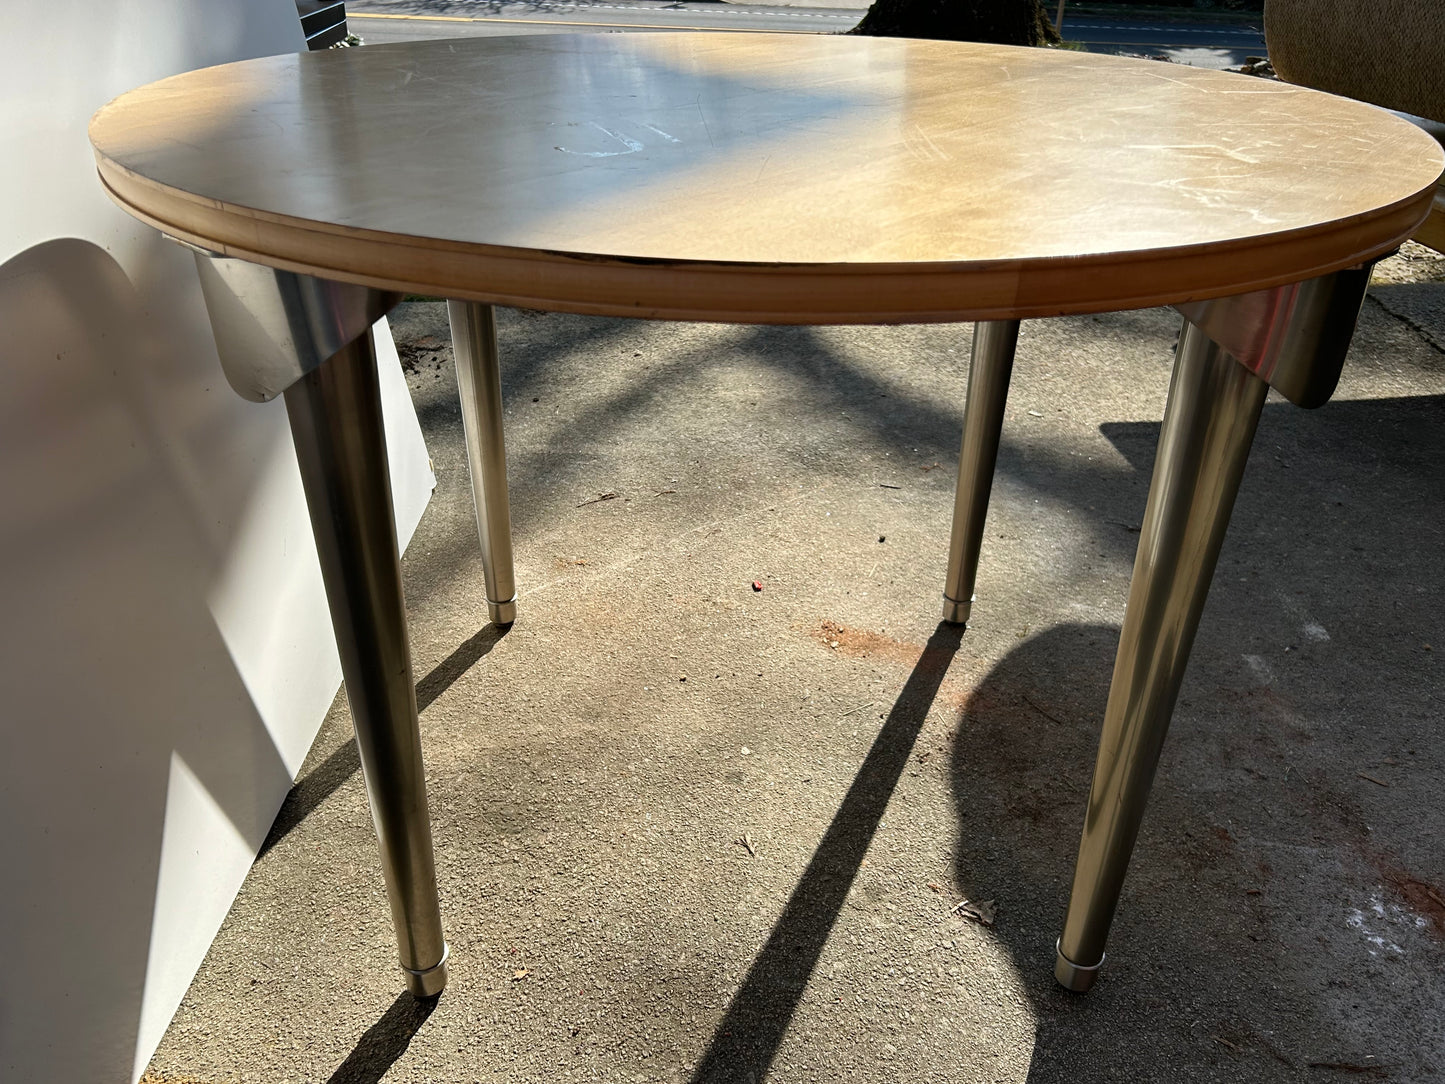 Mid-Century Modern Round Seat Chair Table with Unique Legs